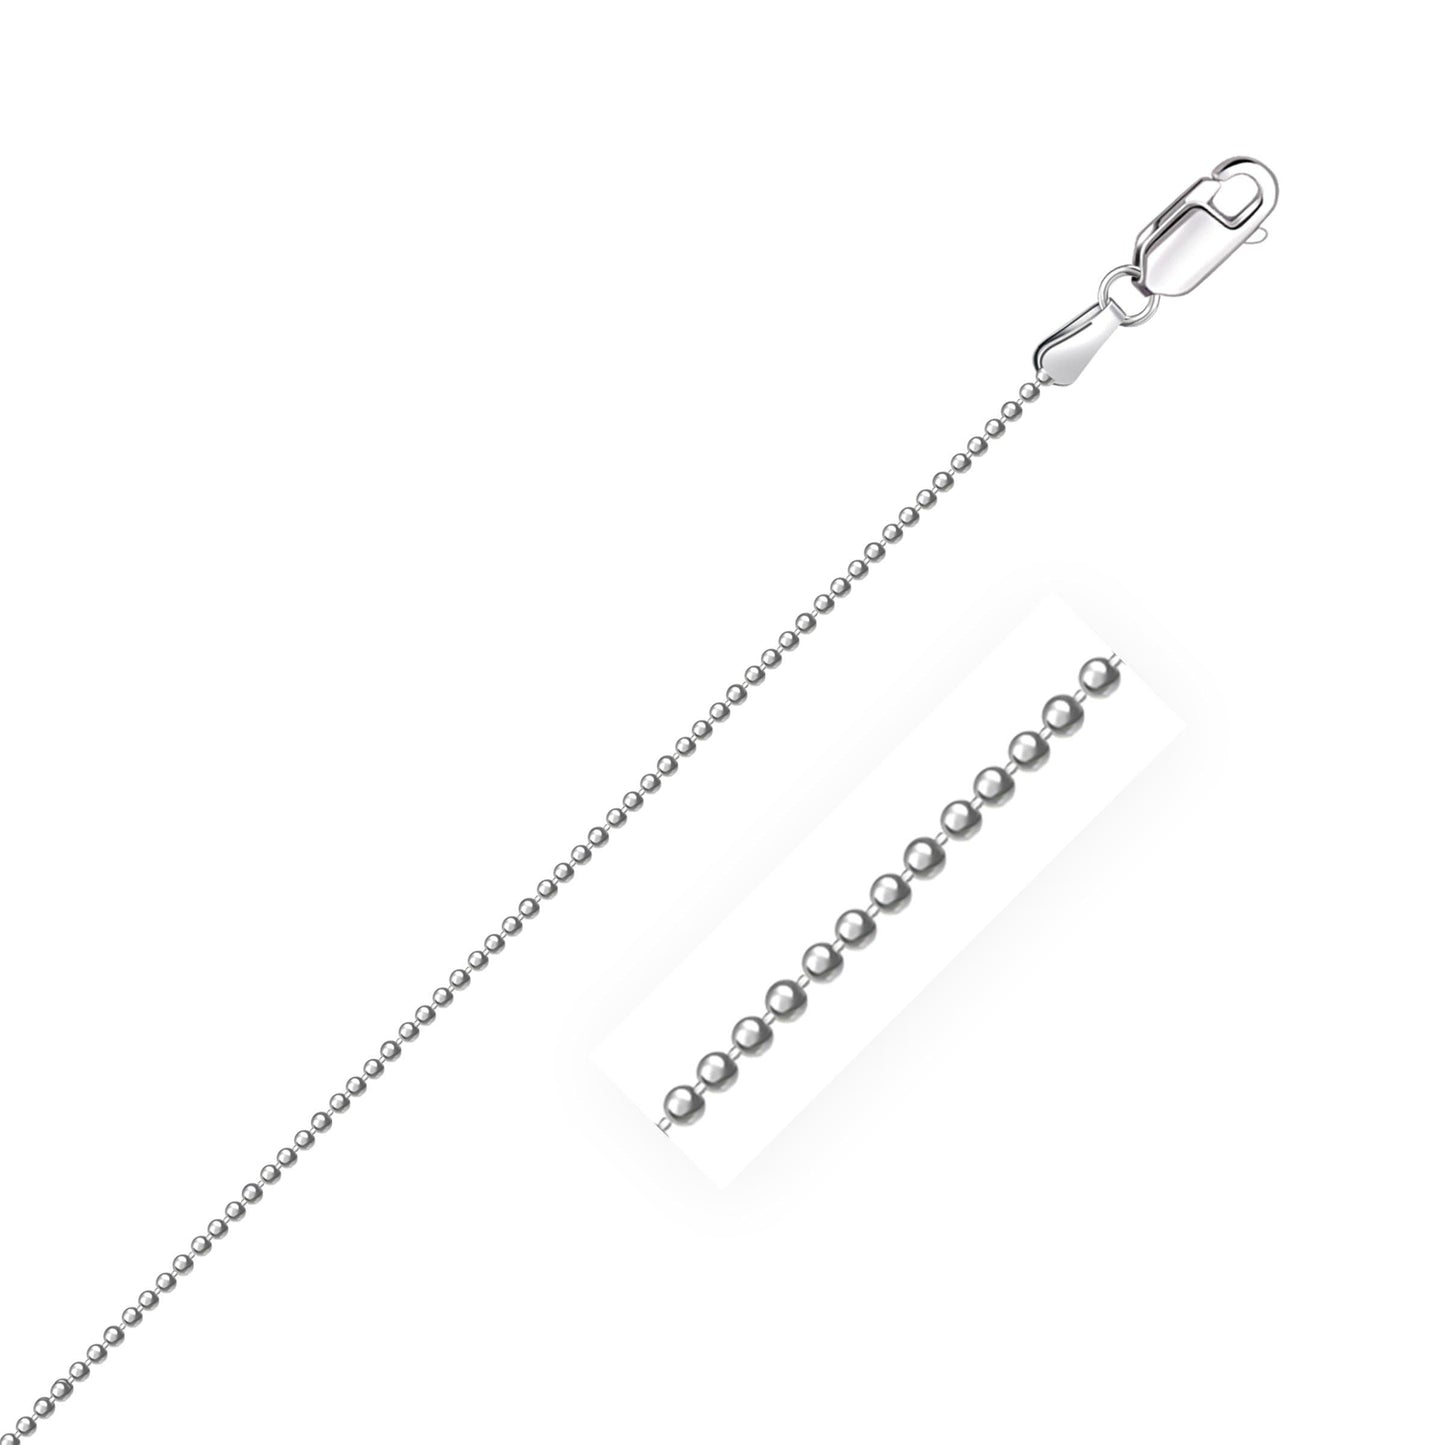 14k White Gold Bead Chain in 1.2 mm